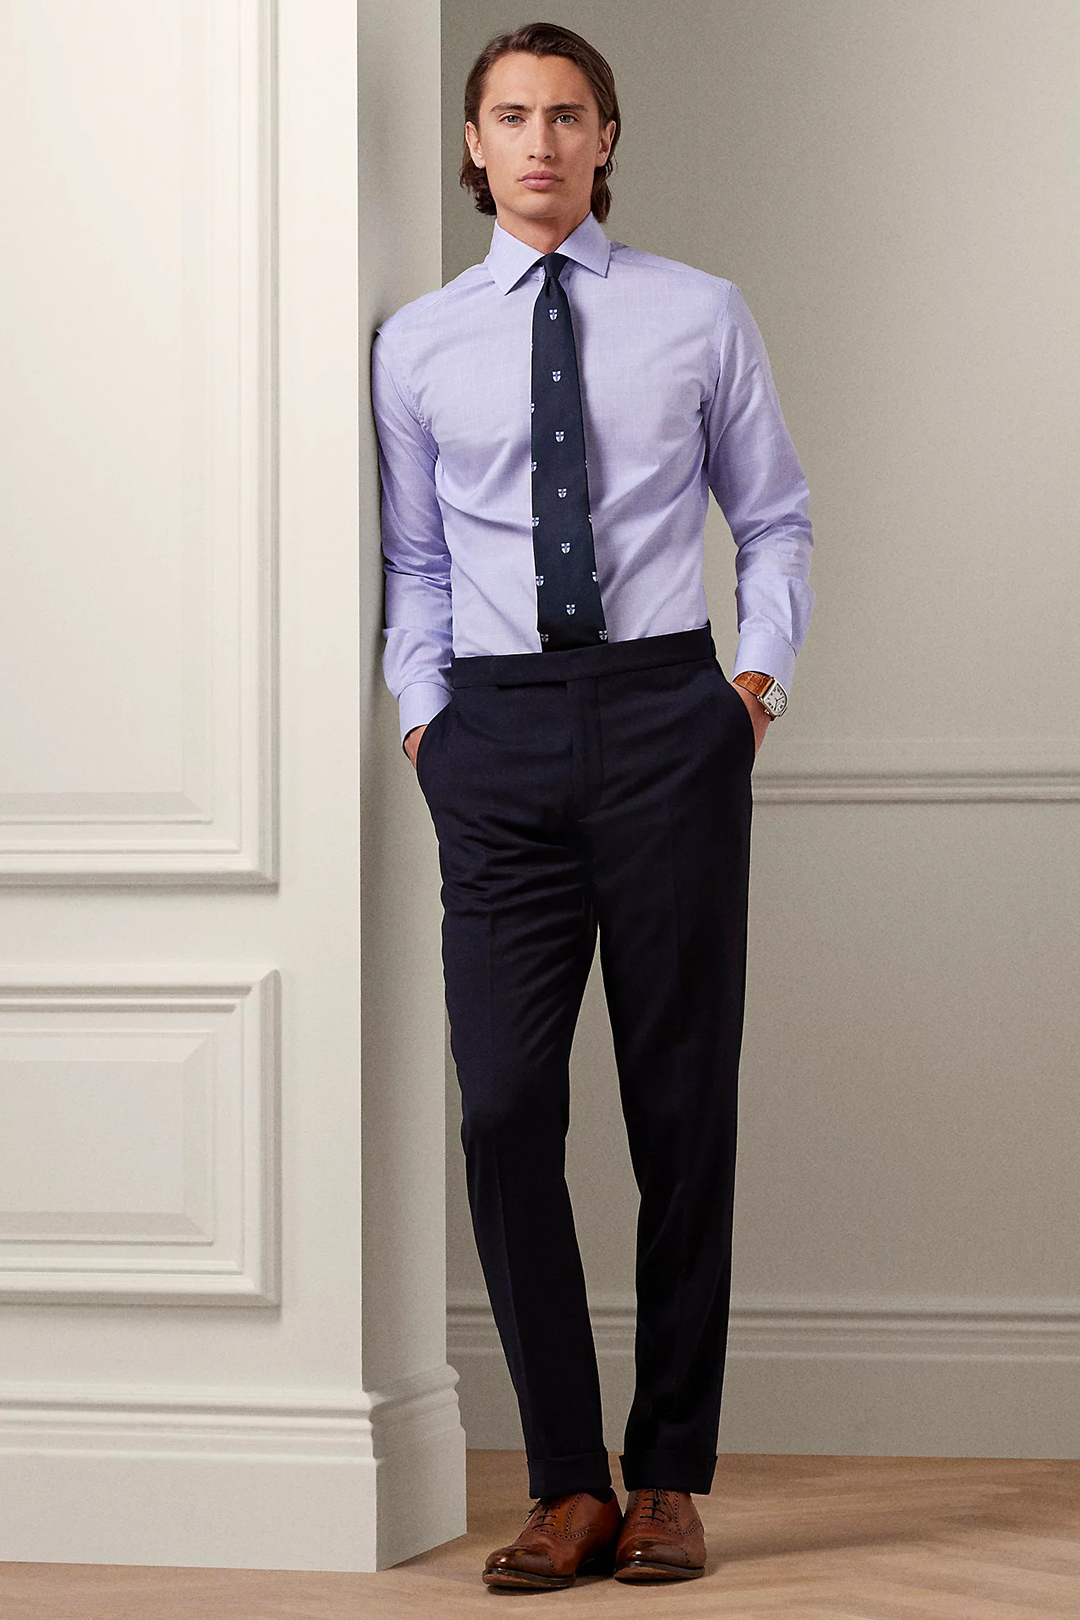 Light blue dress shirt, navy tie, navy blue dress pants, and dark brown Oxford shoes outfit